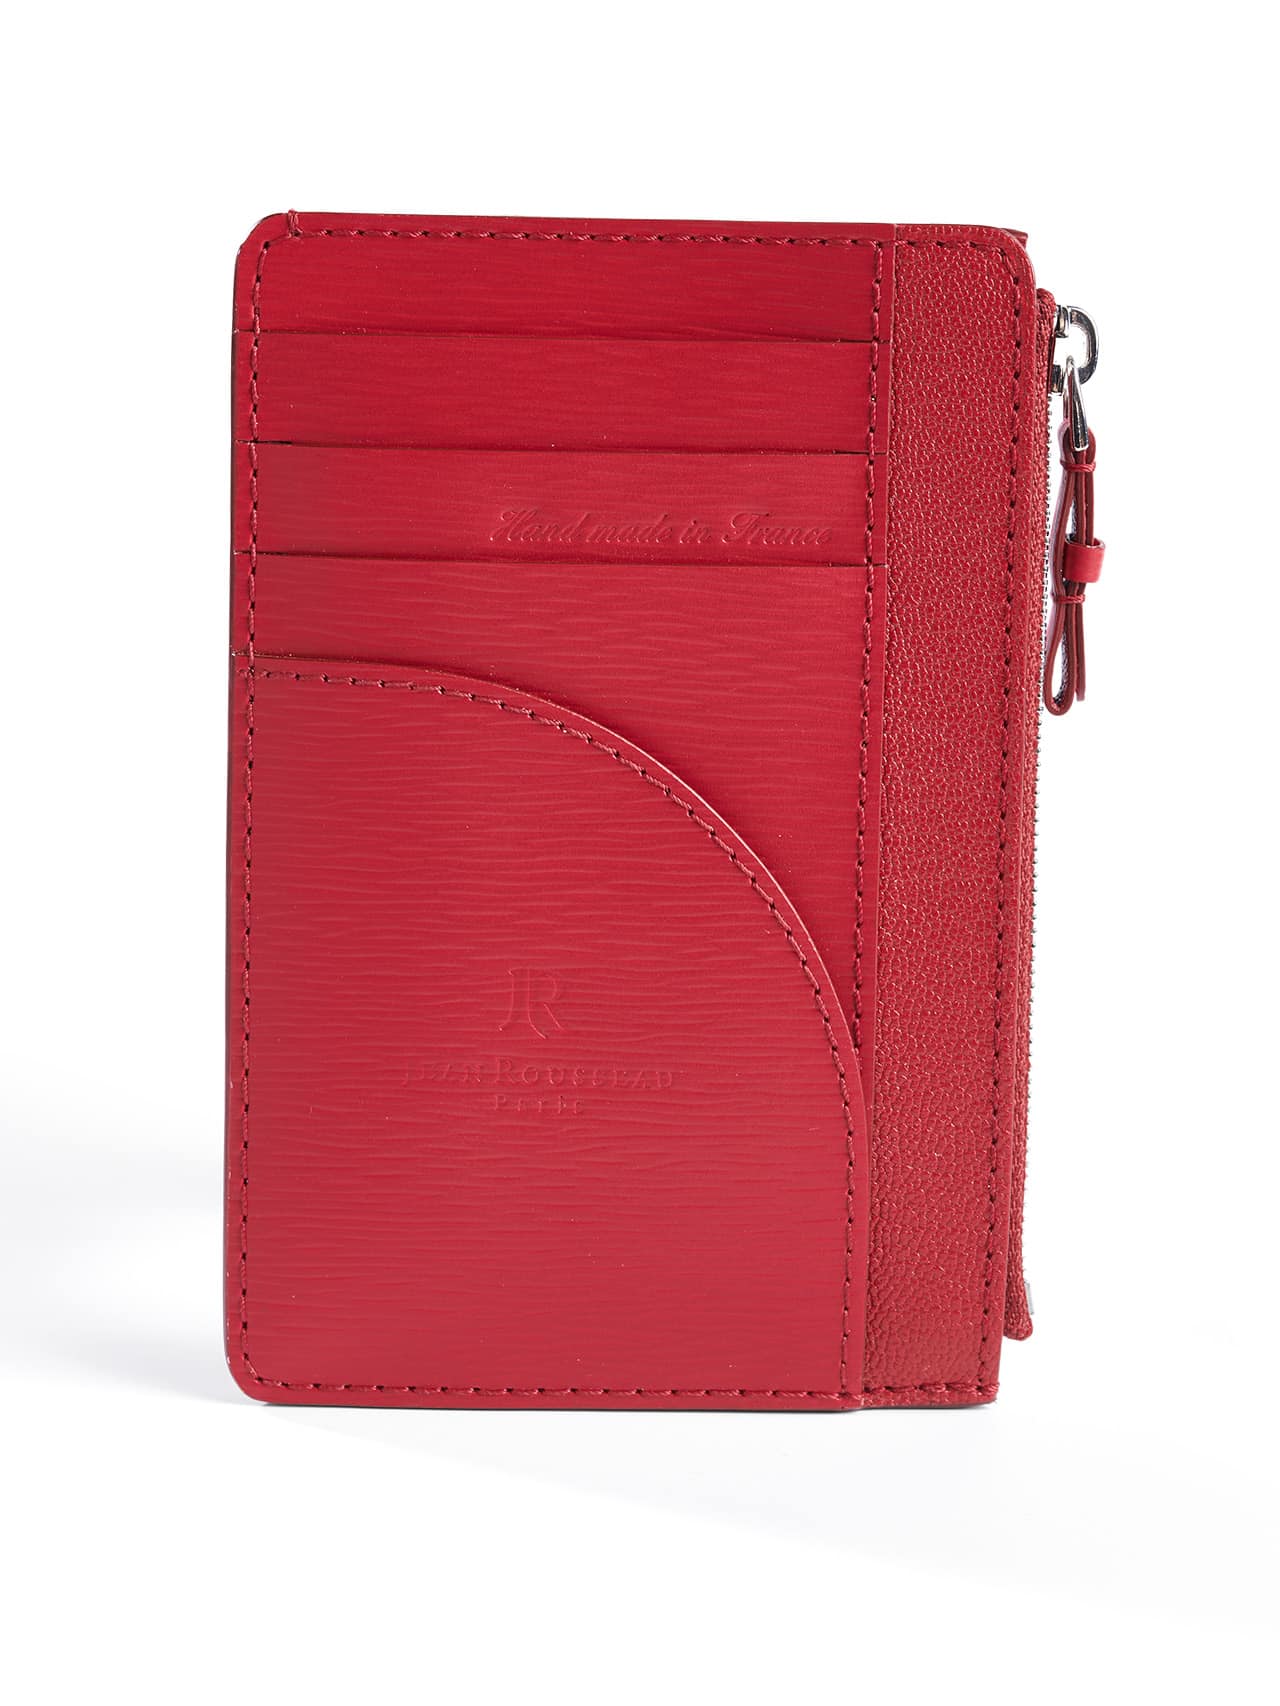 Easy Wallet red calf